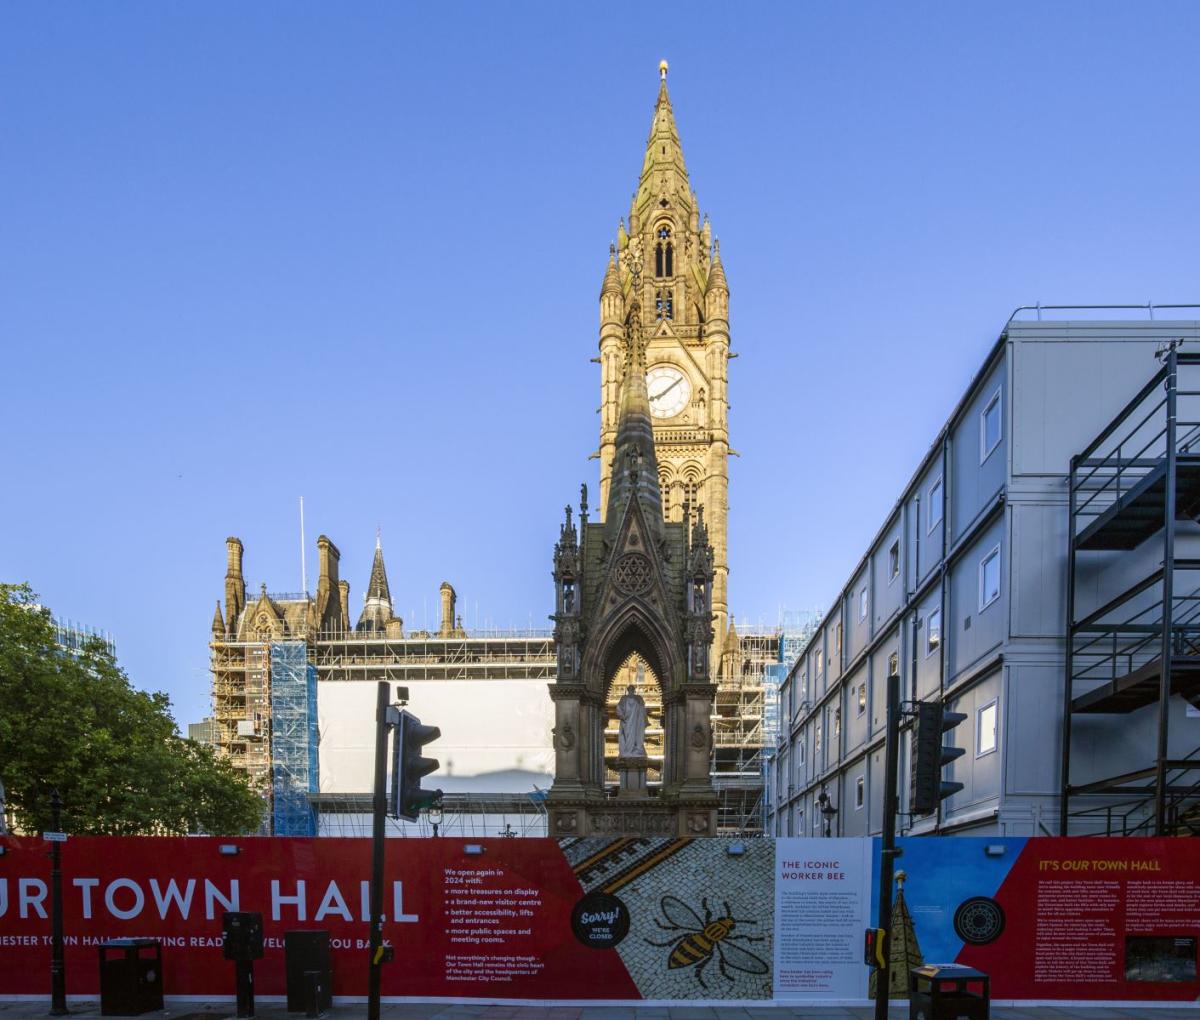 Manchester Town Hall as viewed on 20 July 2020 during refurbishment.